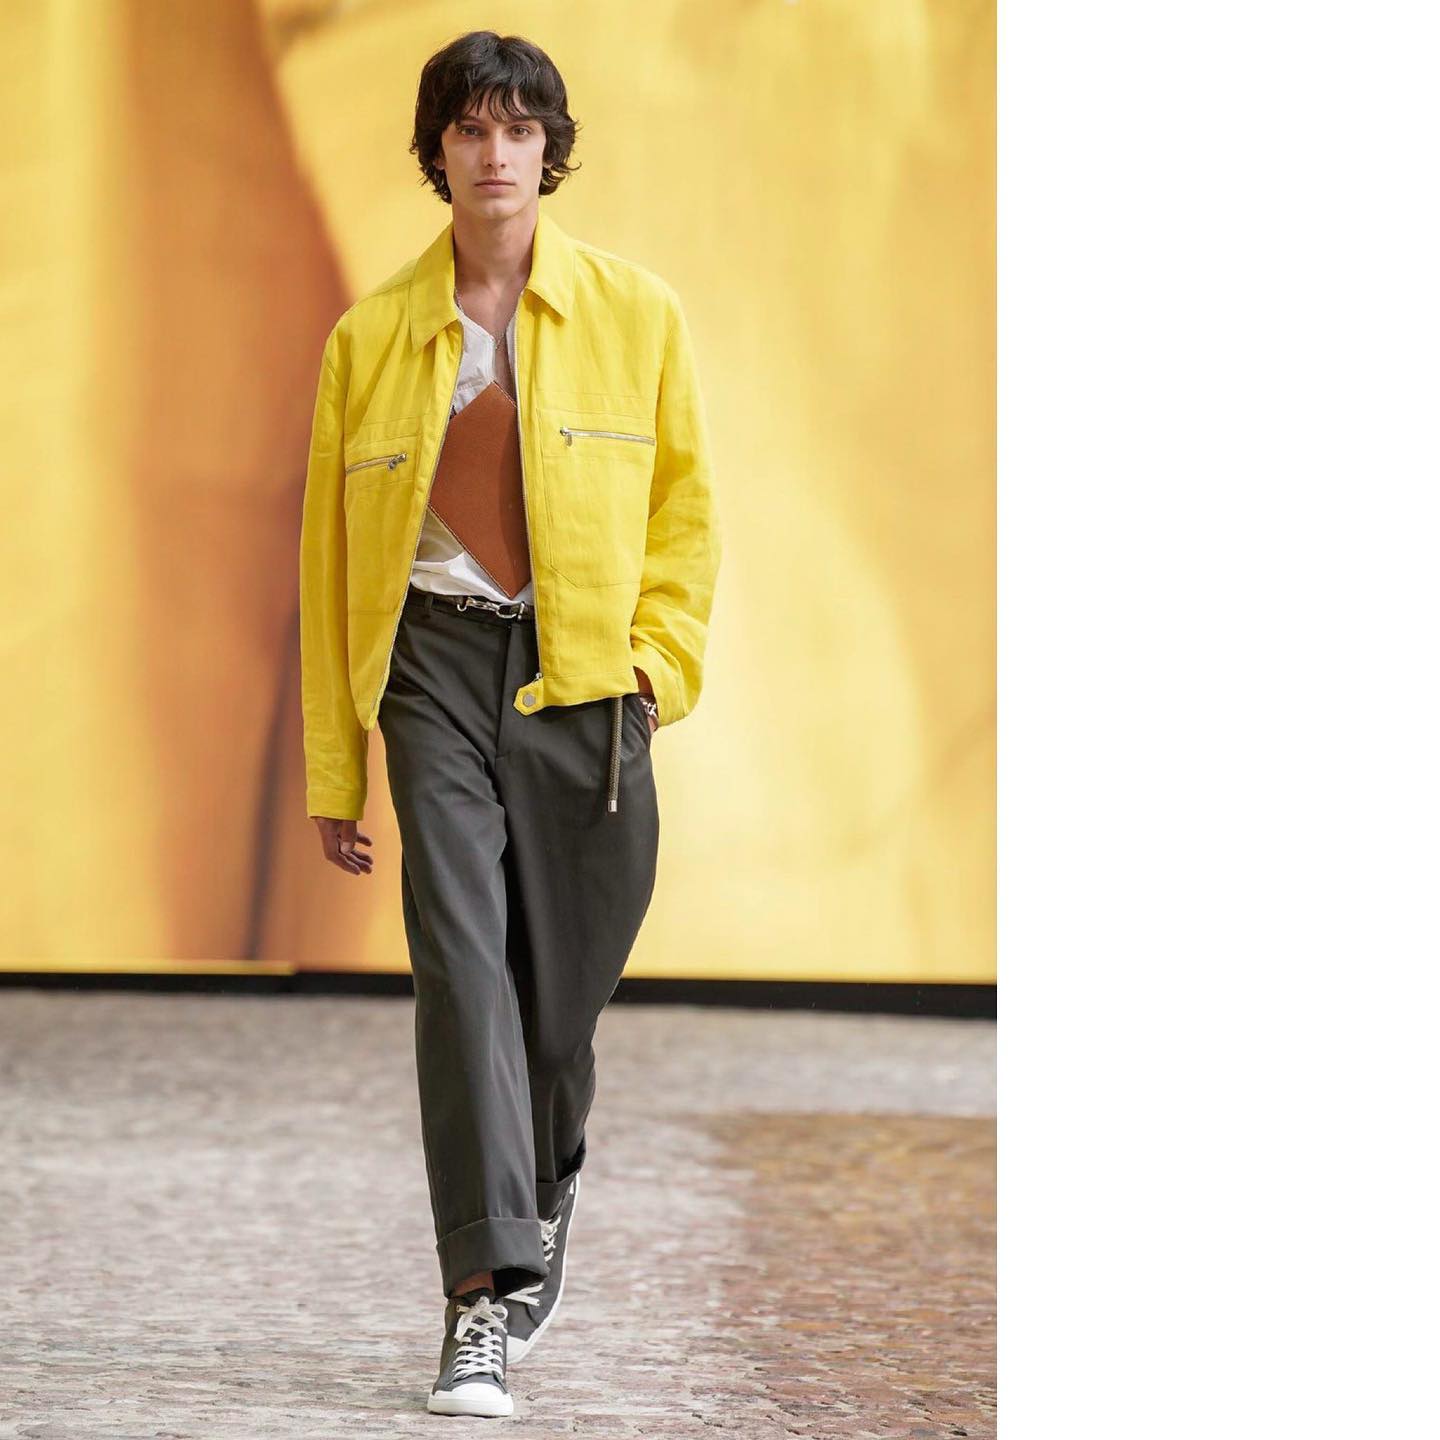 Dries for Hermès SS22 by Veronique Nichenian. Styling by Beat Bollinger, hair by Matt Mullhall, makeup by Alexandra Schiavi, casting by Sophie Bruynoghe.